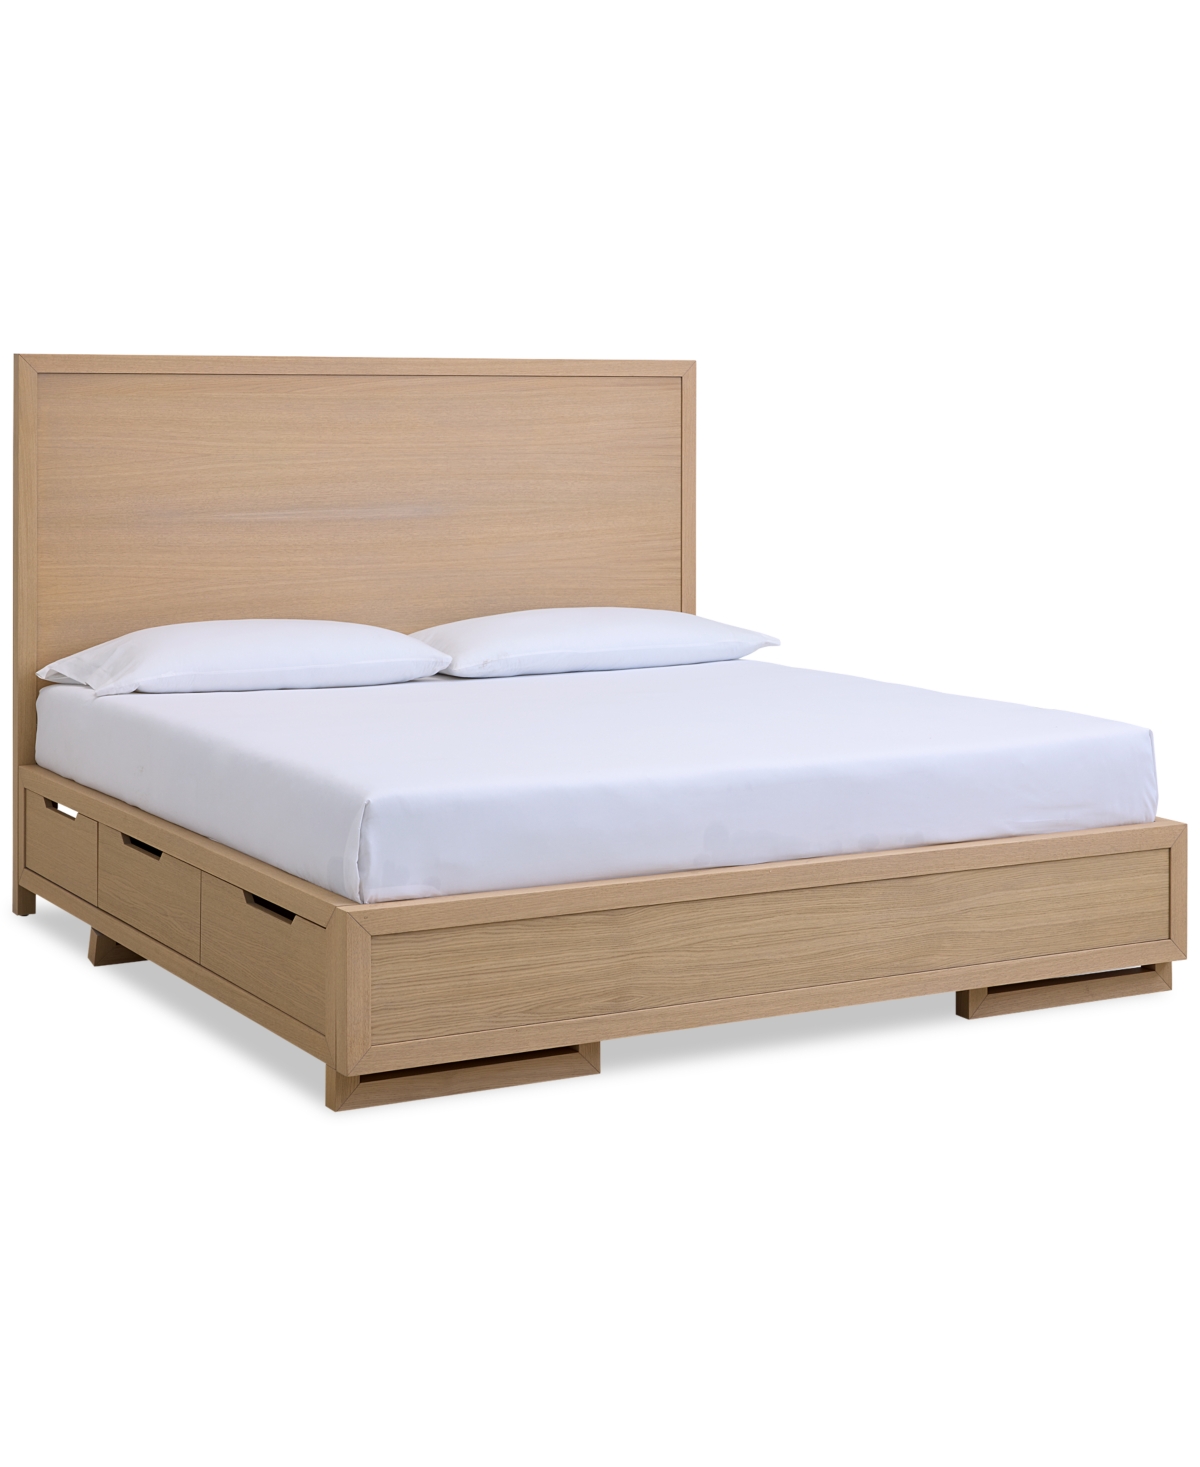 Drexel Atwell King Storage Bed In No Color